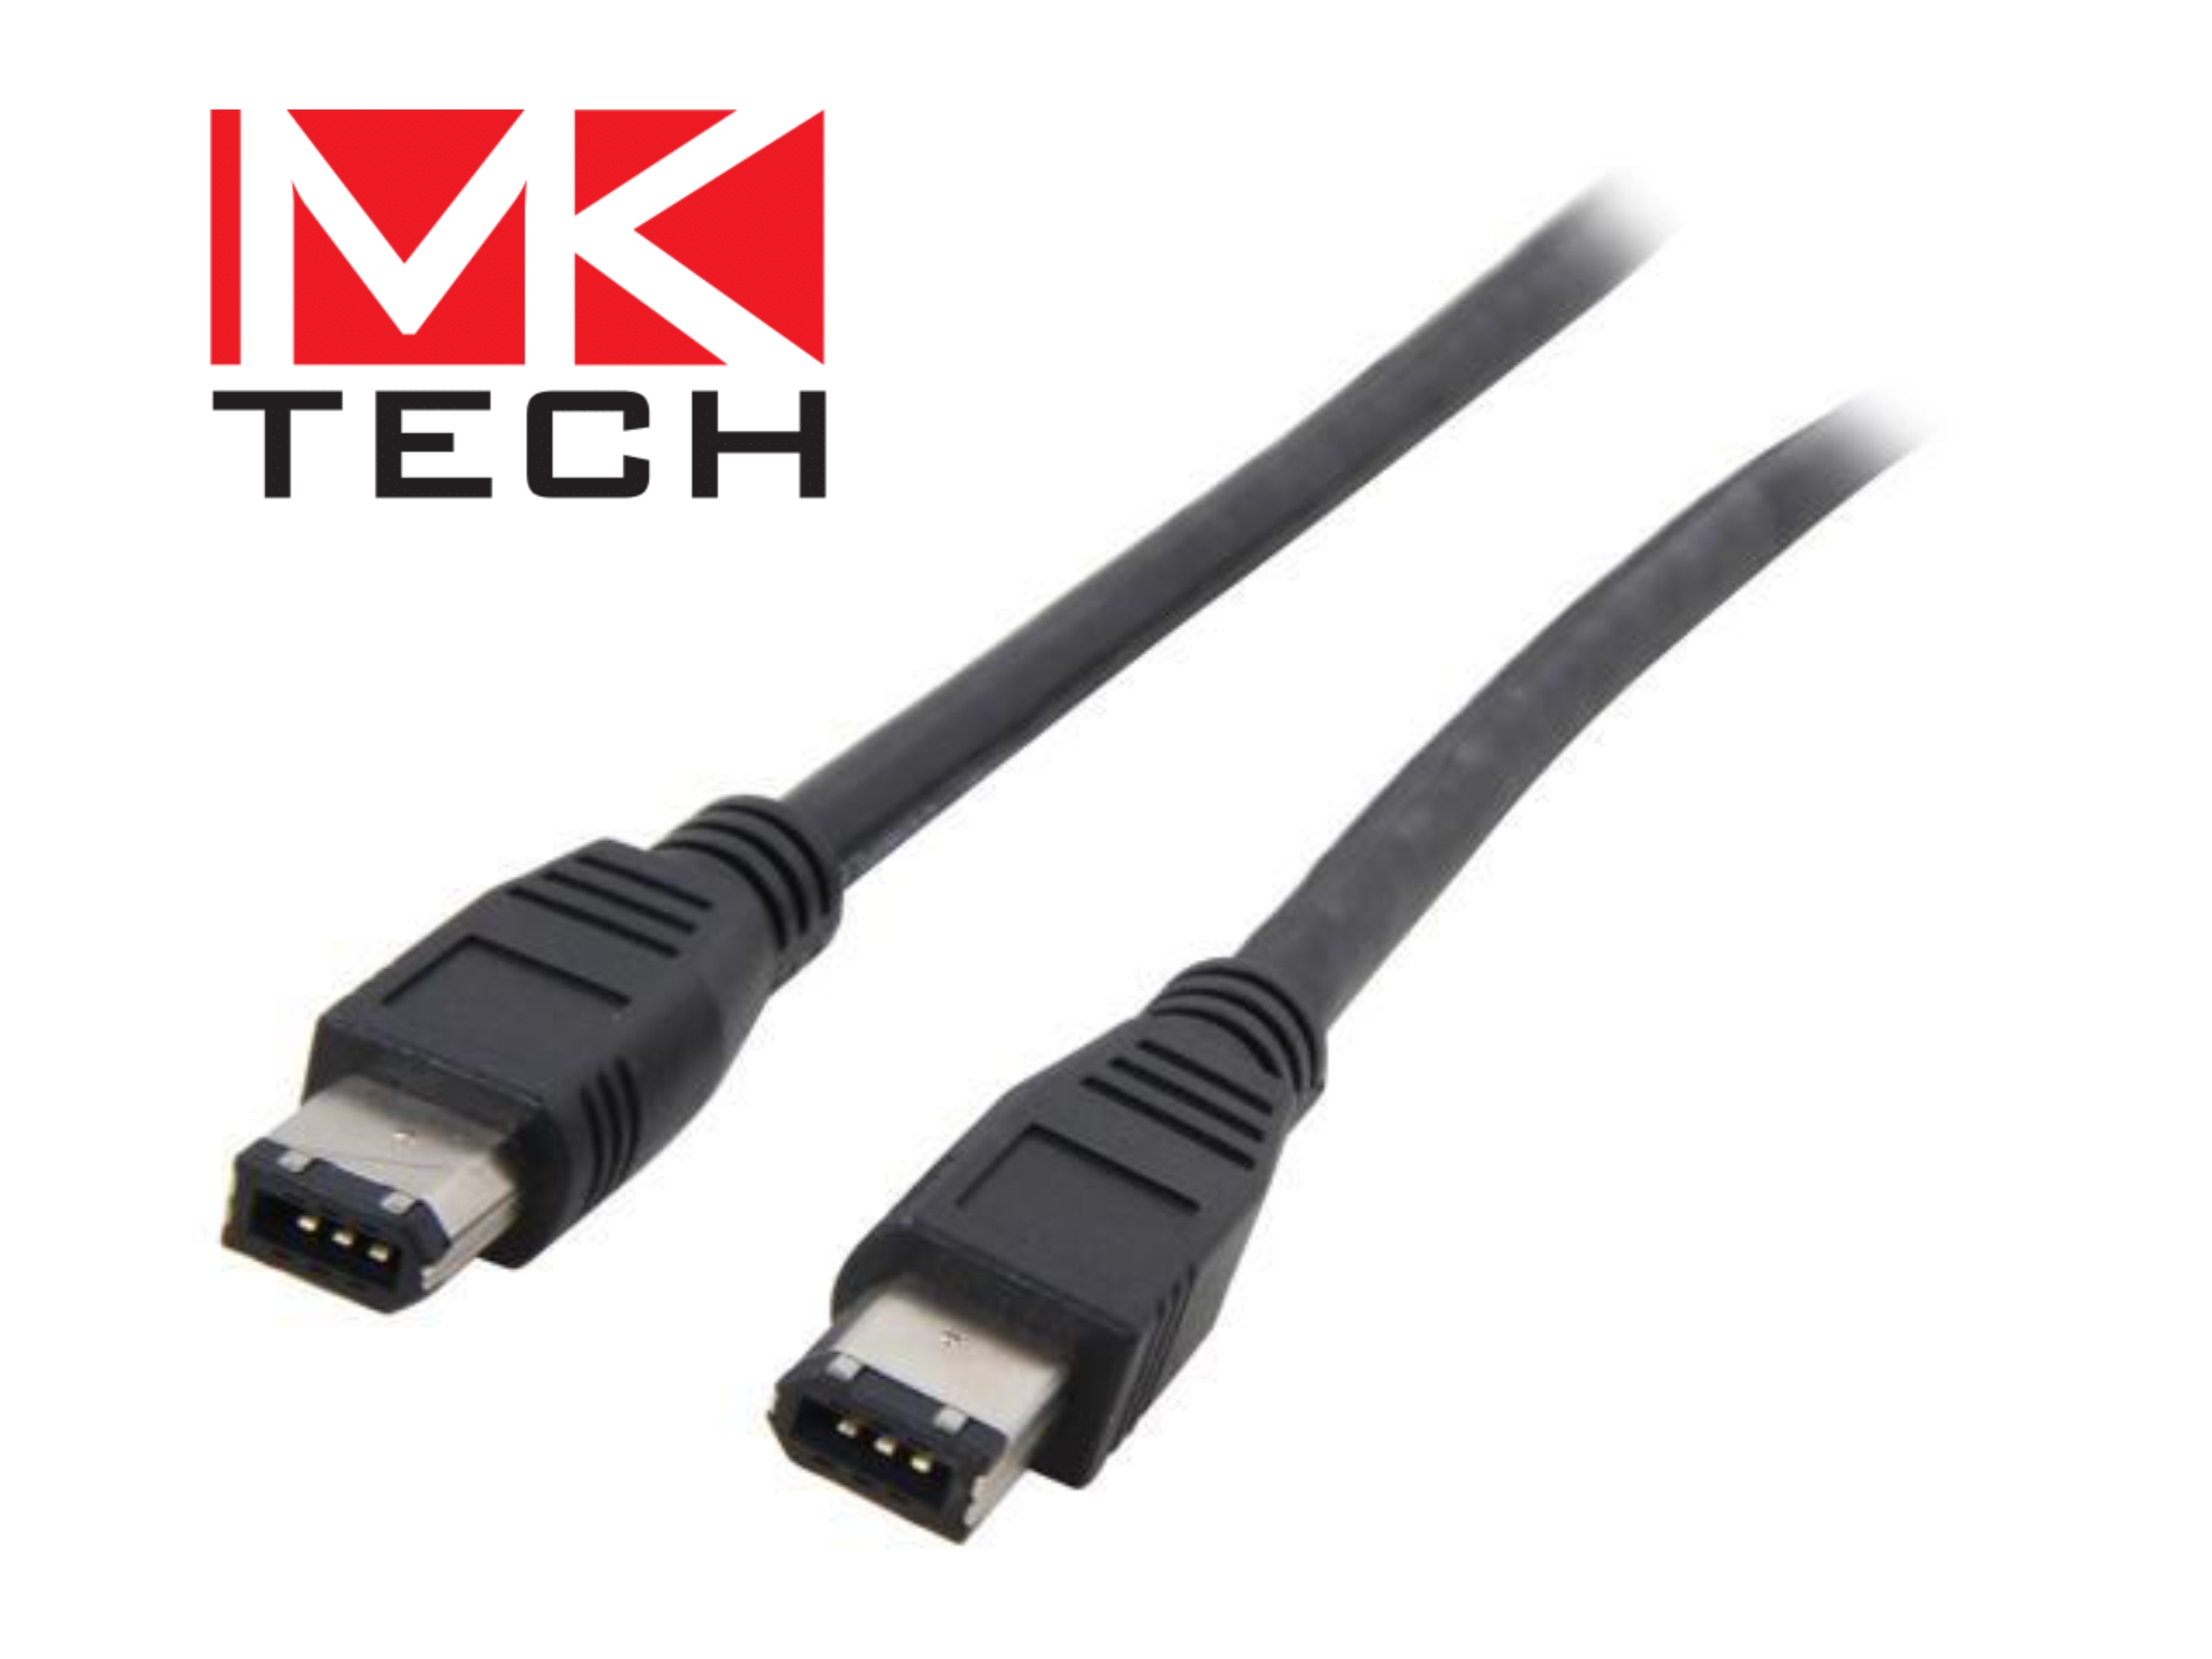 MKTECH IEEE-1394 cable, type 6/6, 1.0m